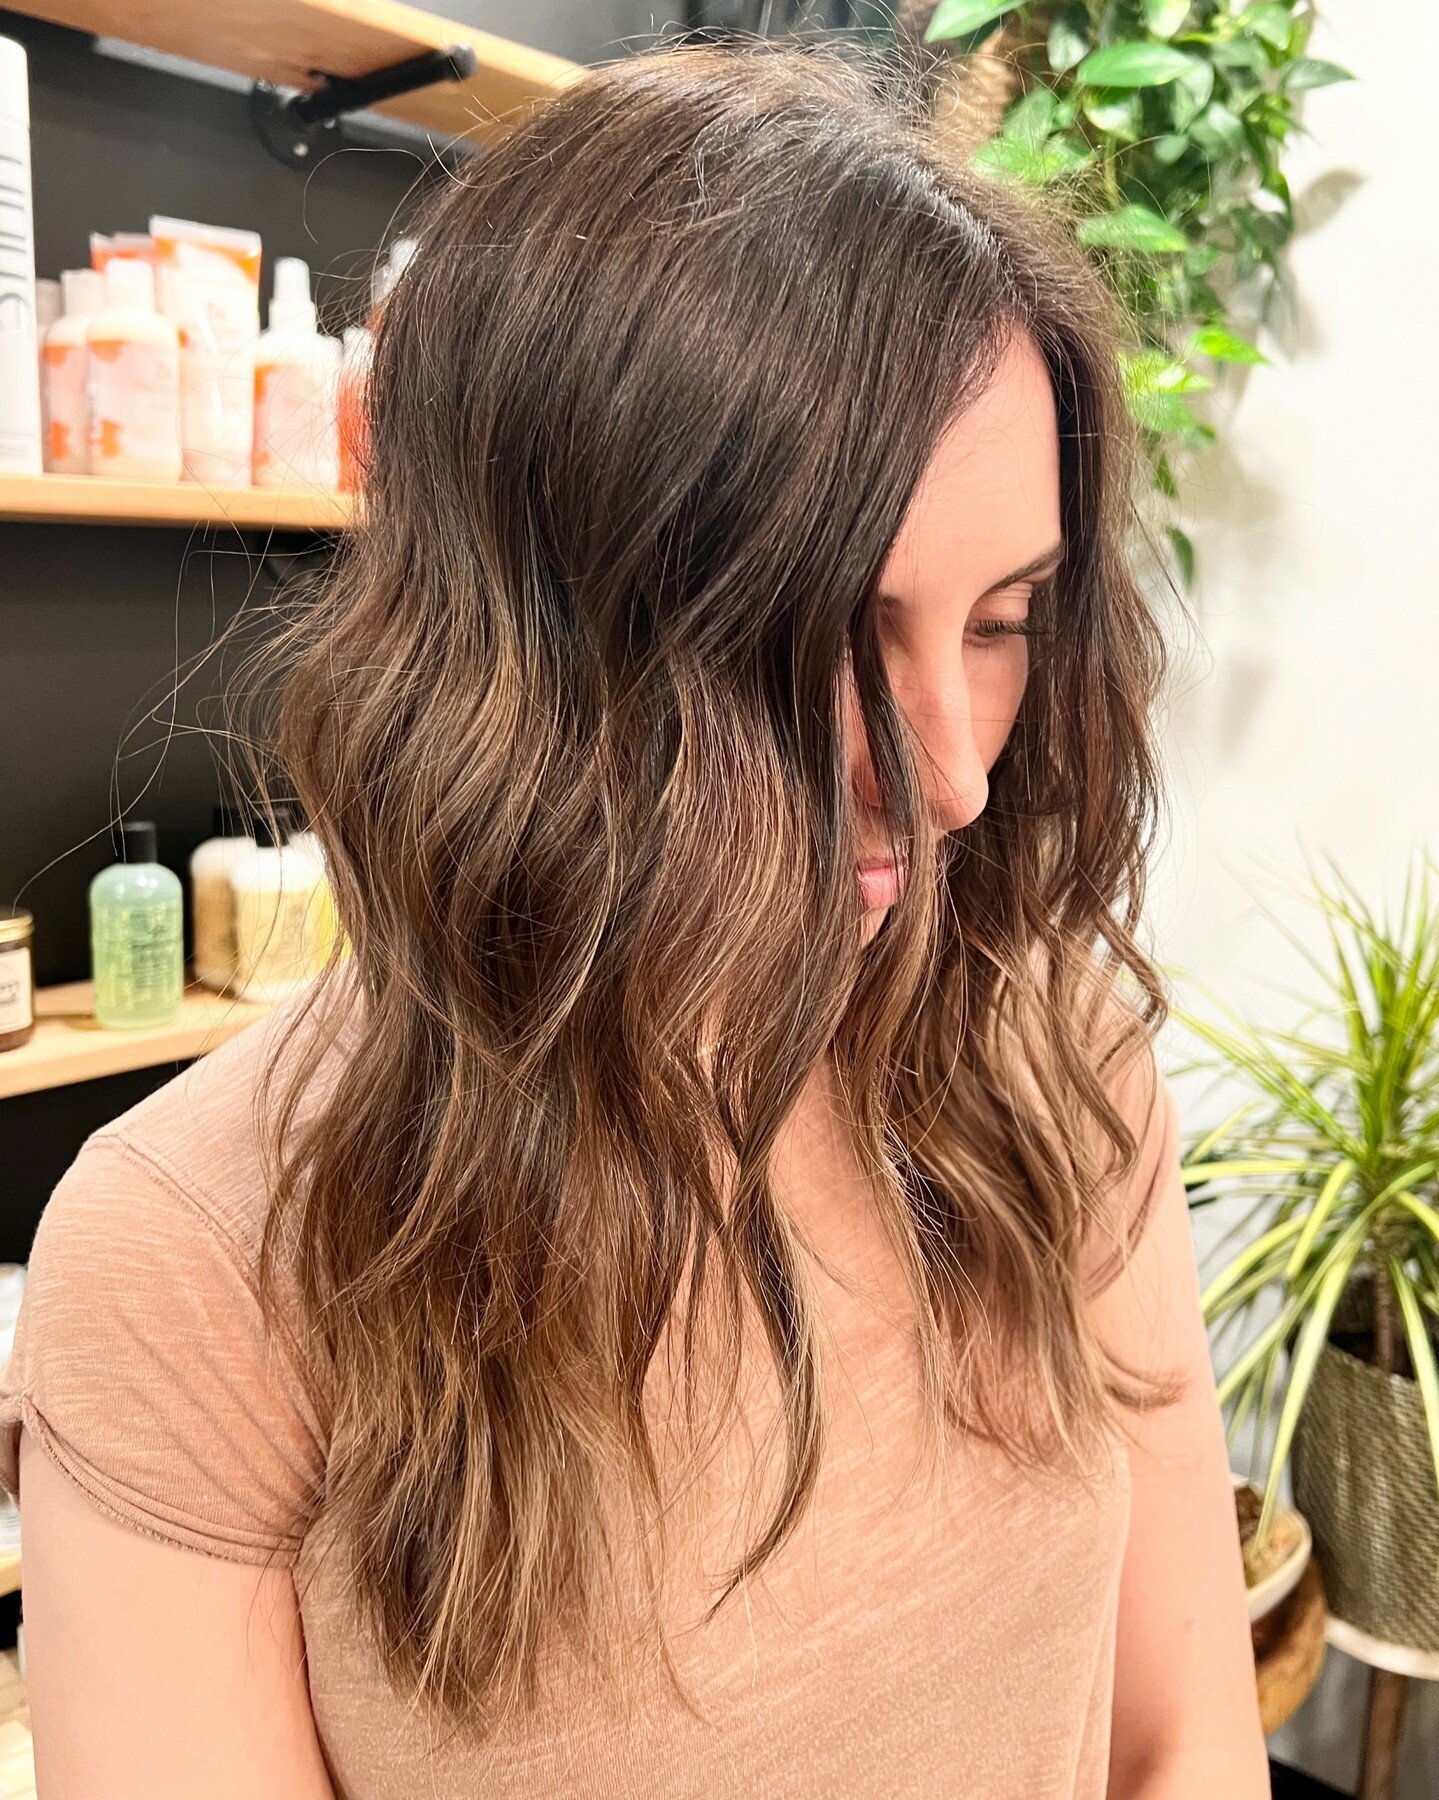 Feeling those summer time vibes today 
 
This your summer time brunette hair inspo.......sun kissed dimension: the perfect summer time hair compliment. ✿

Book a dimension color session and let me take your hair out of winter hibernation 

click link